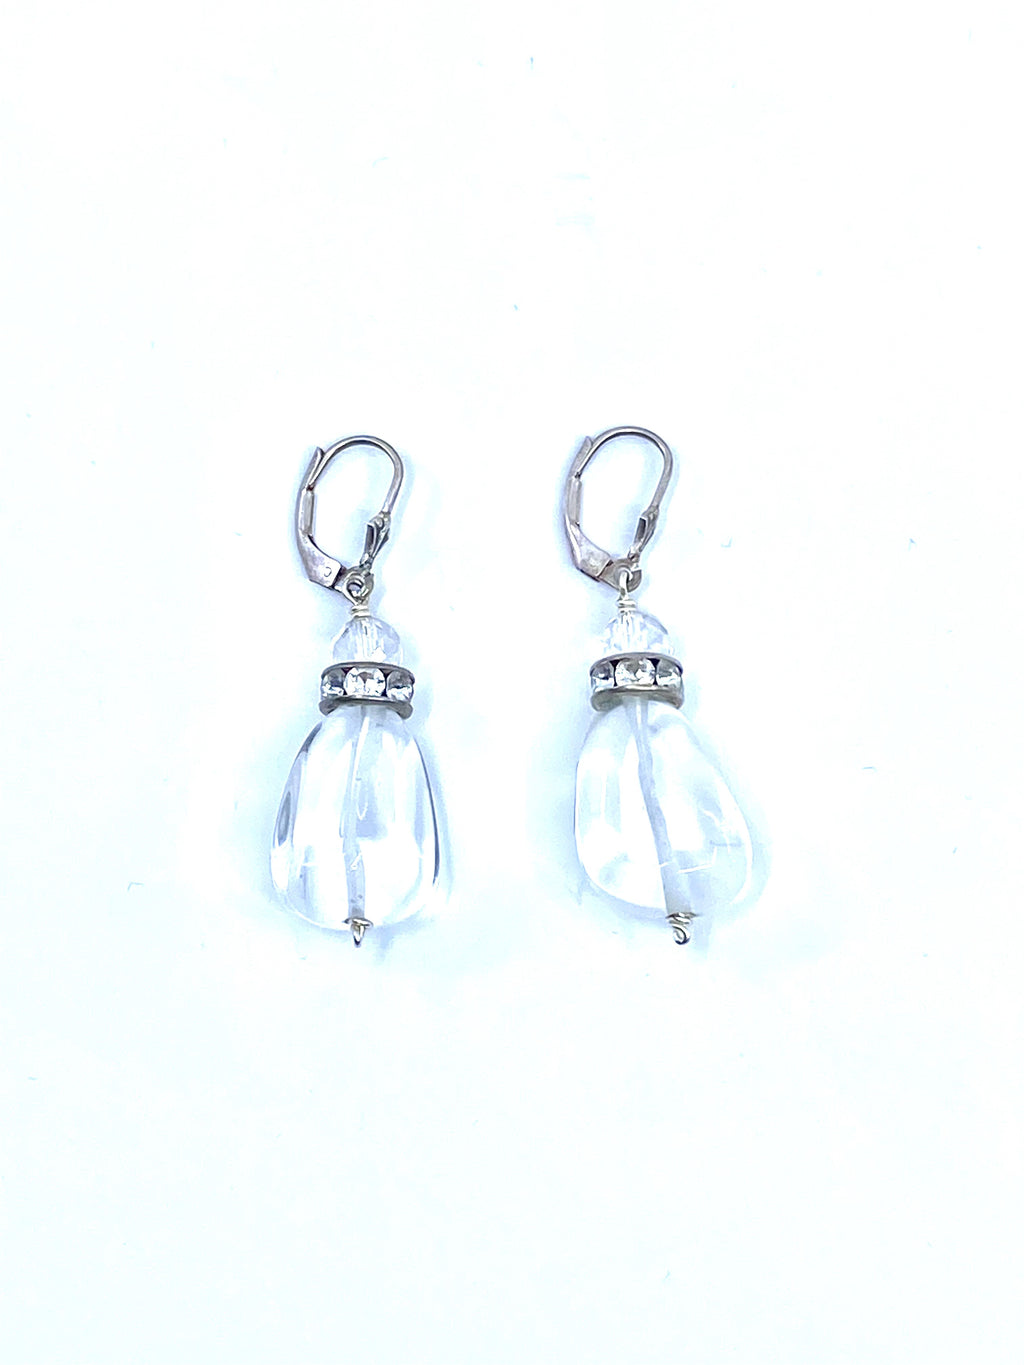 Luxurious Smooth Quartz Sterling Silver Earrings.